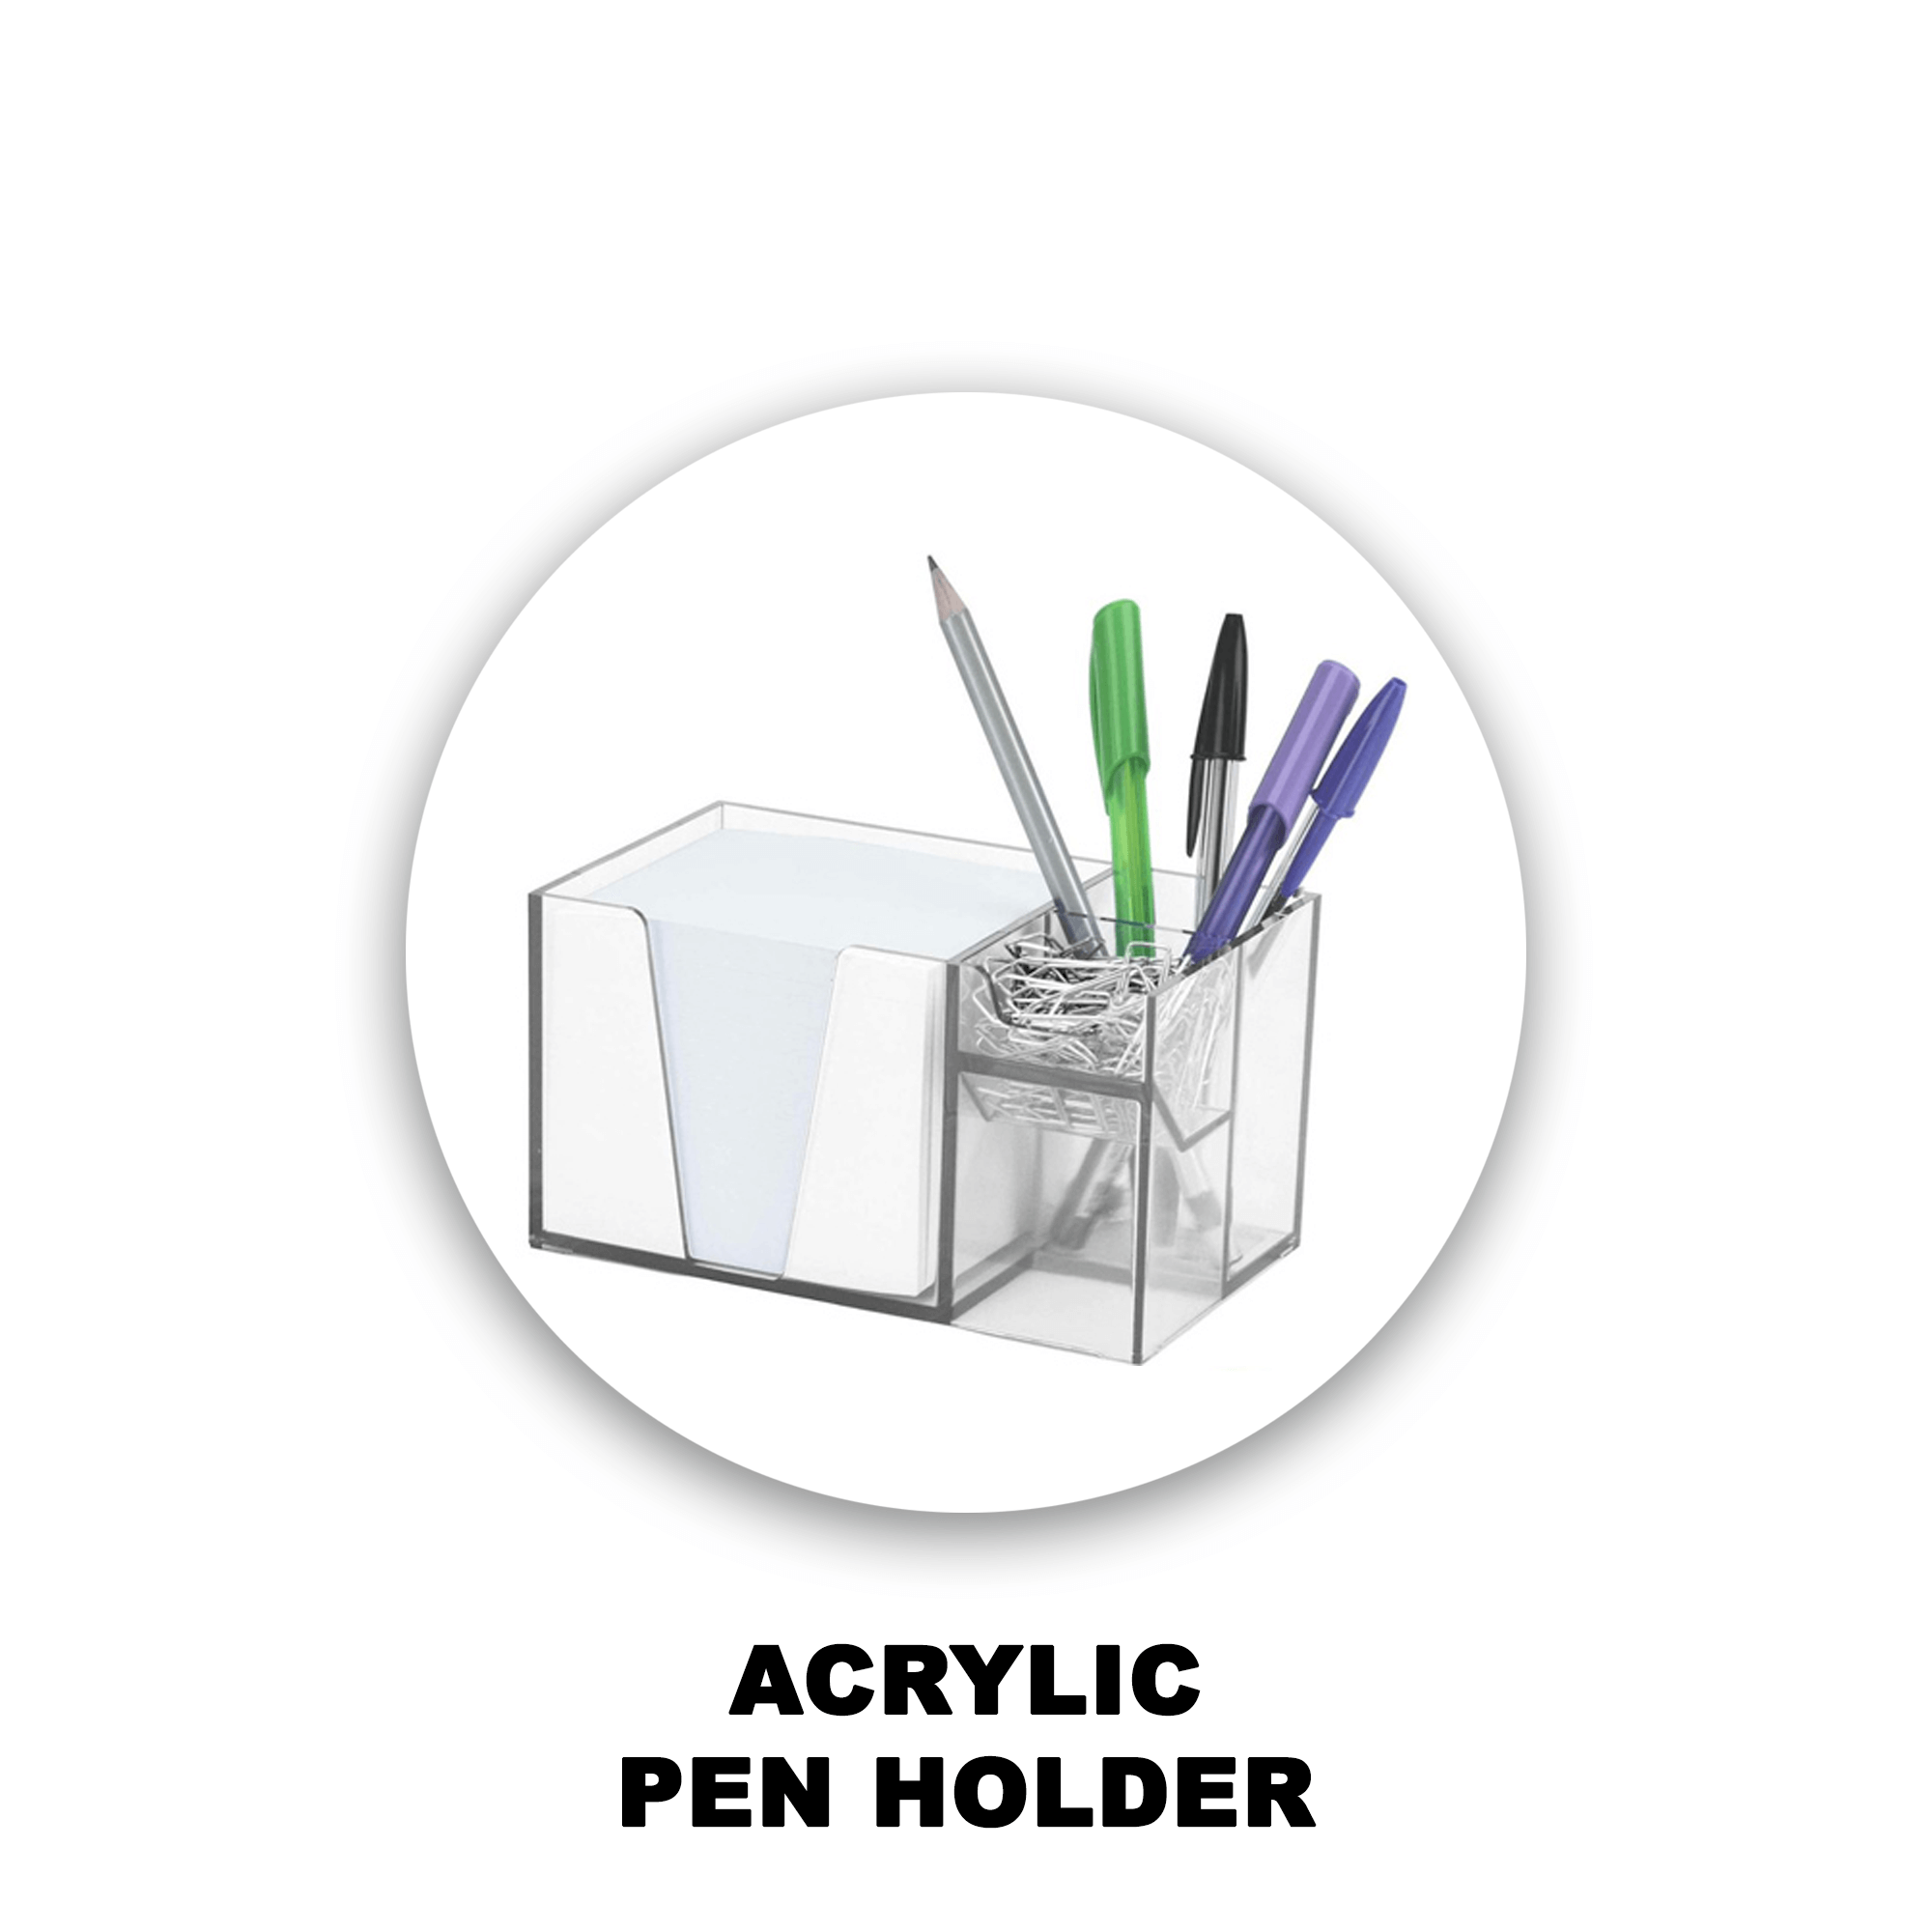 How to sketch Pen Holder step by step || drawing pen holder - YouTube